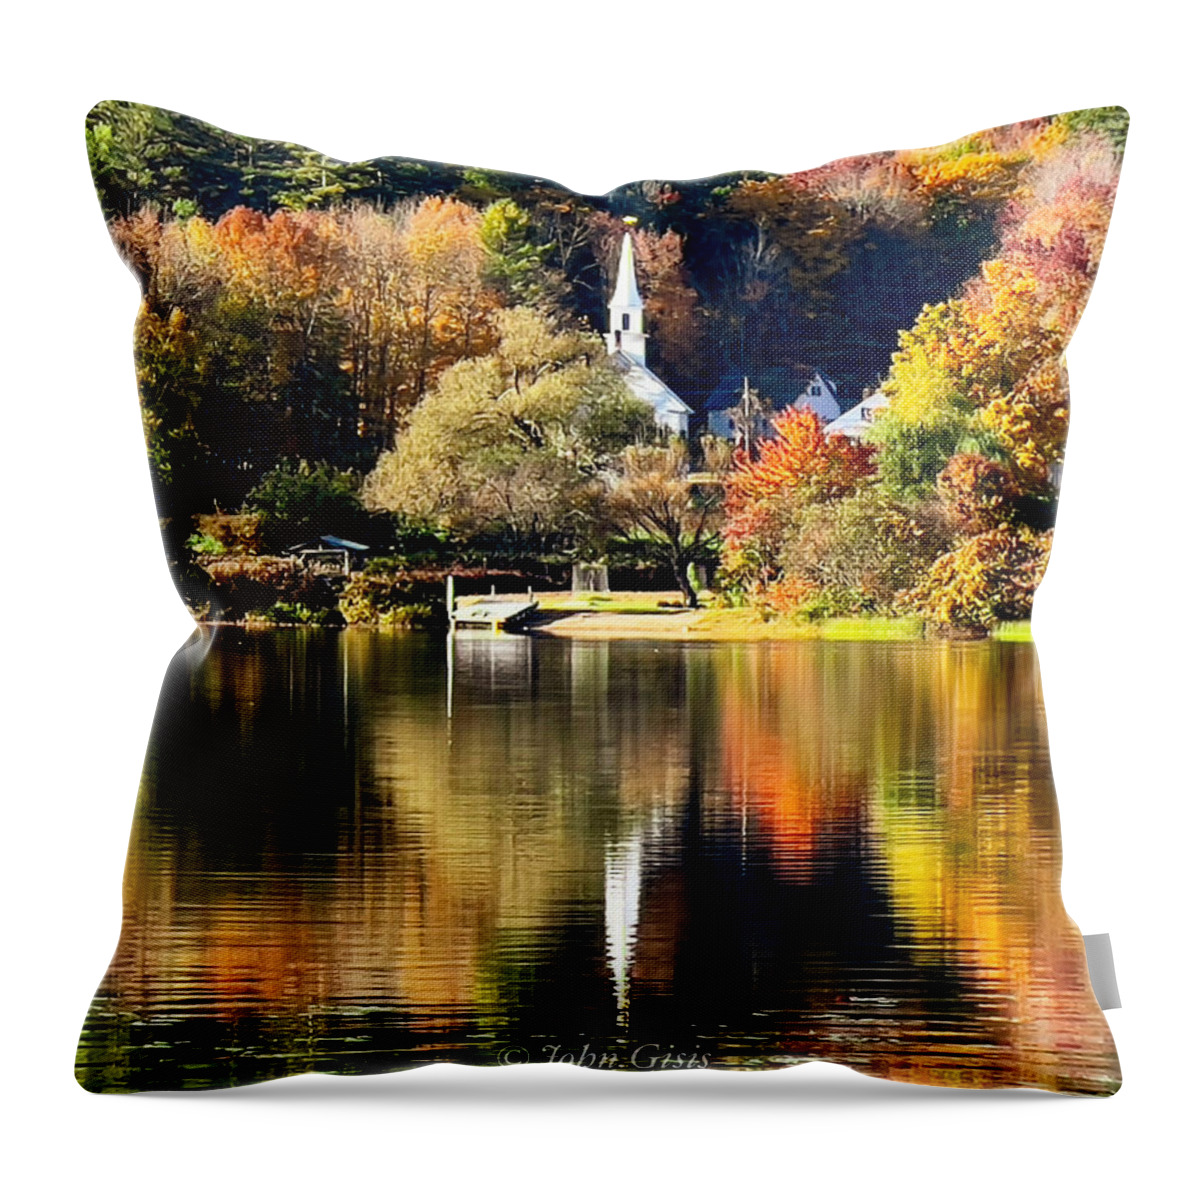  Throw Pillow featuring the photograph Little White Church by John Gisis